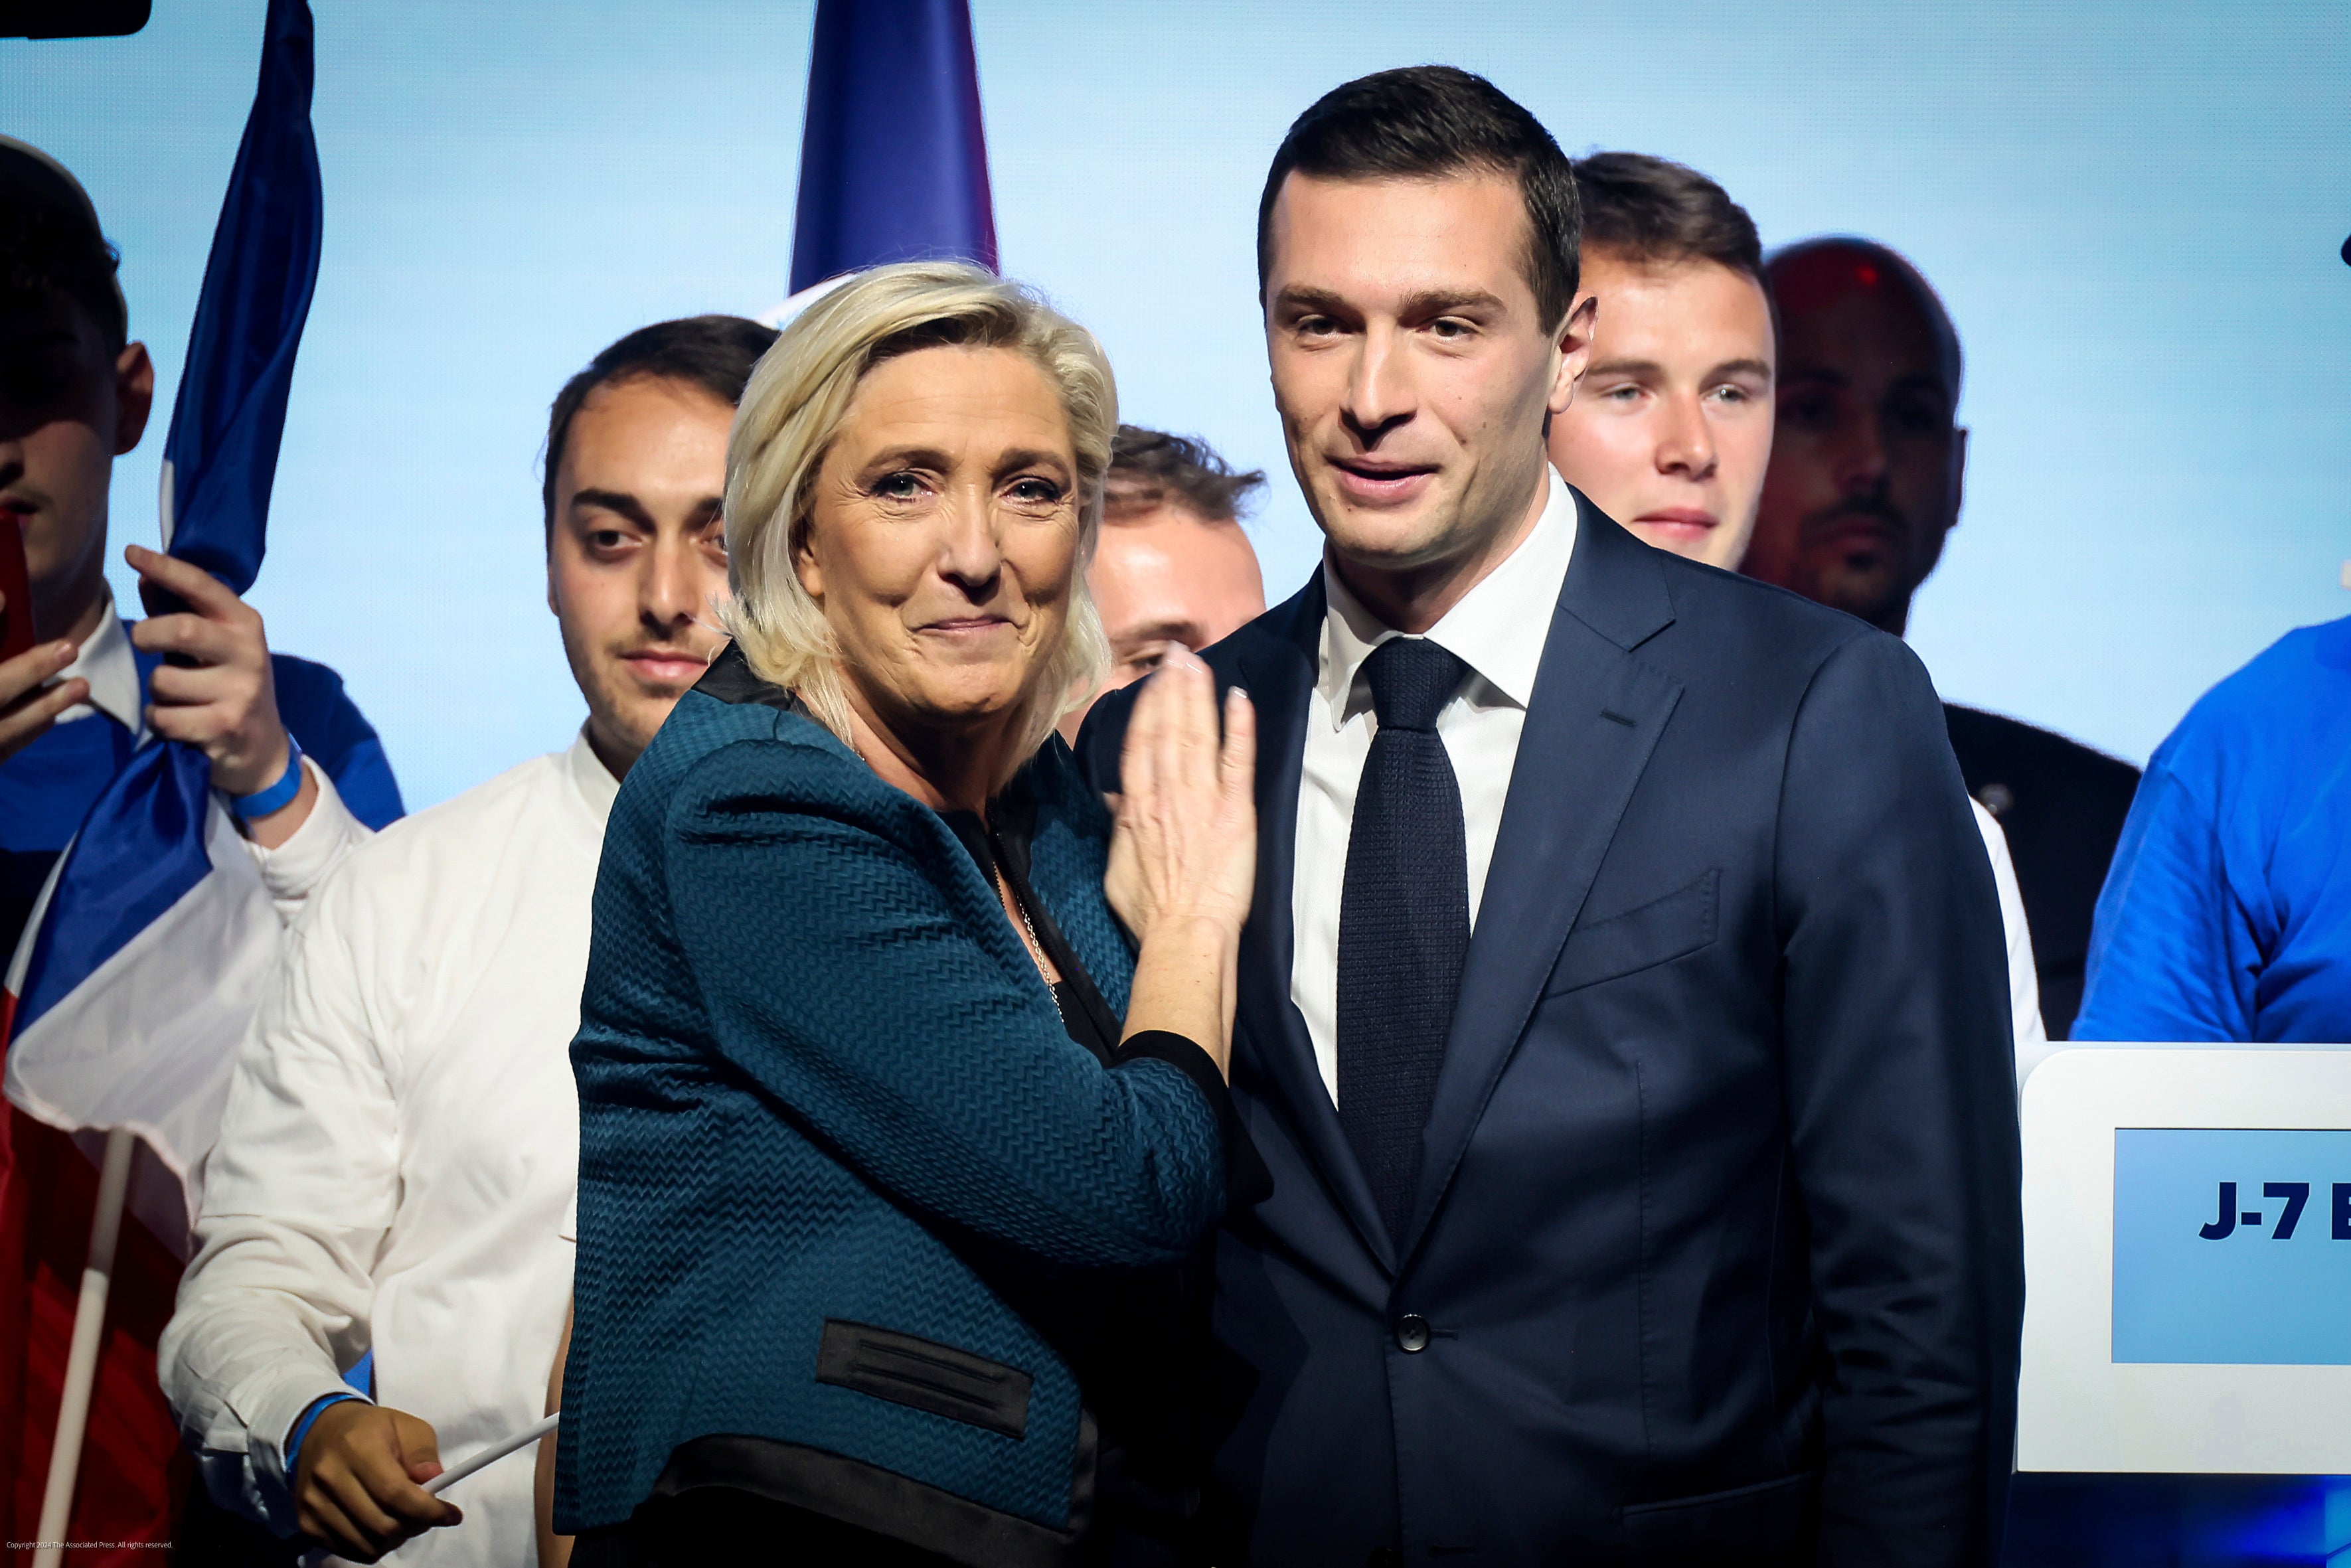 National Rally and its allies won a third of the votes, while Emmanuel Macron’s centrists received just 20 per cent